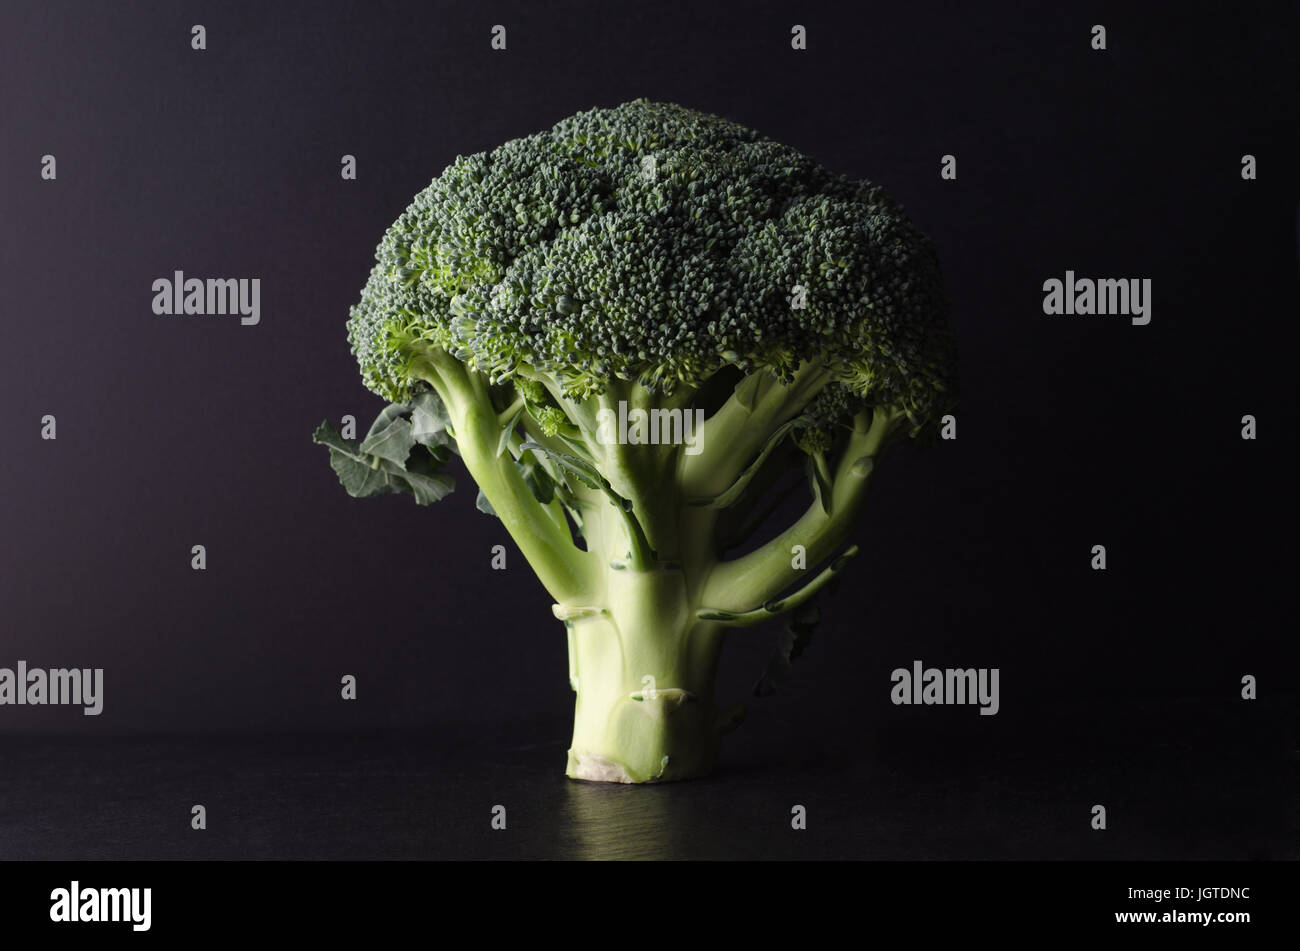 A head of broccoli, tree shaped and standing upright on black surface against black background.  Lit to create dark, moody effect and strong contrast  Stock Photo